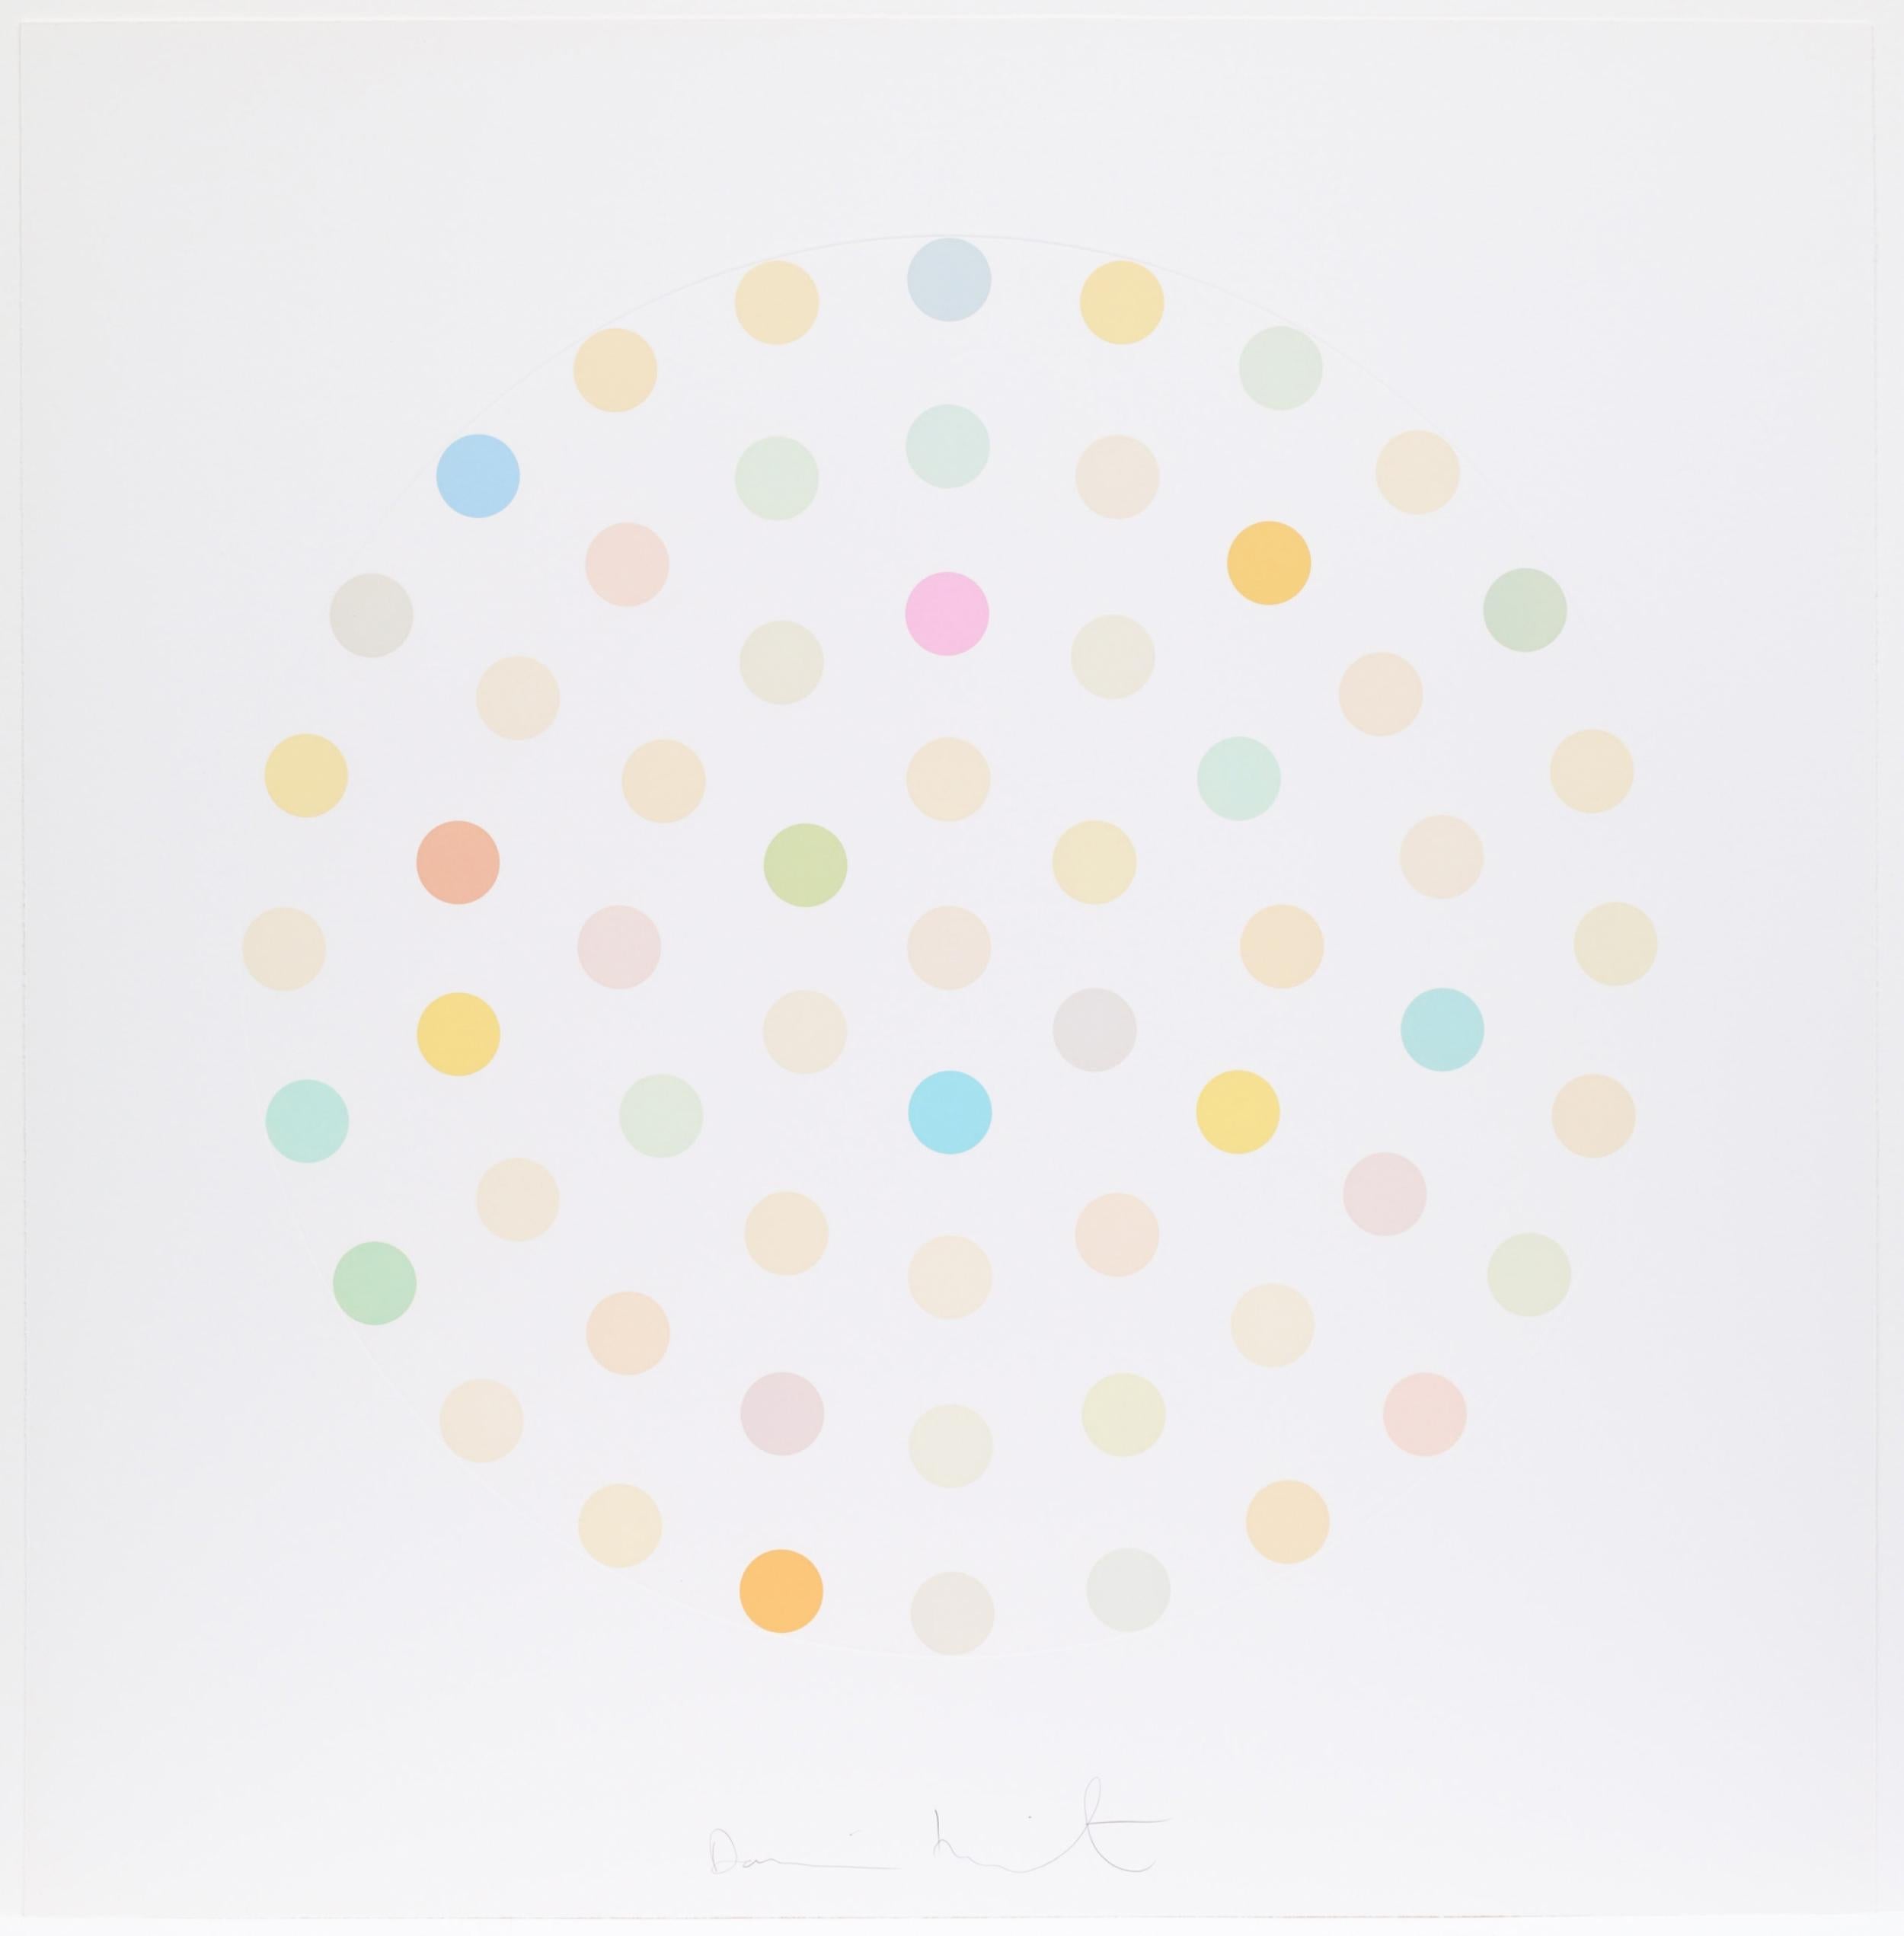 DAMIEN HIRST
Ciclopirox Olamine, 2004
Etching with aquatint in colours, on Hahnemühle paper
Signed recto and numbered from the edition of 145 verso
Published by The Paragon Press, London
Diameter: 86.0 cm (33.8 in) 
Sheet: 115.3 x 112.7 cm (45.4  x